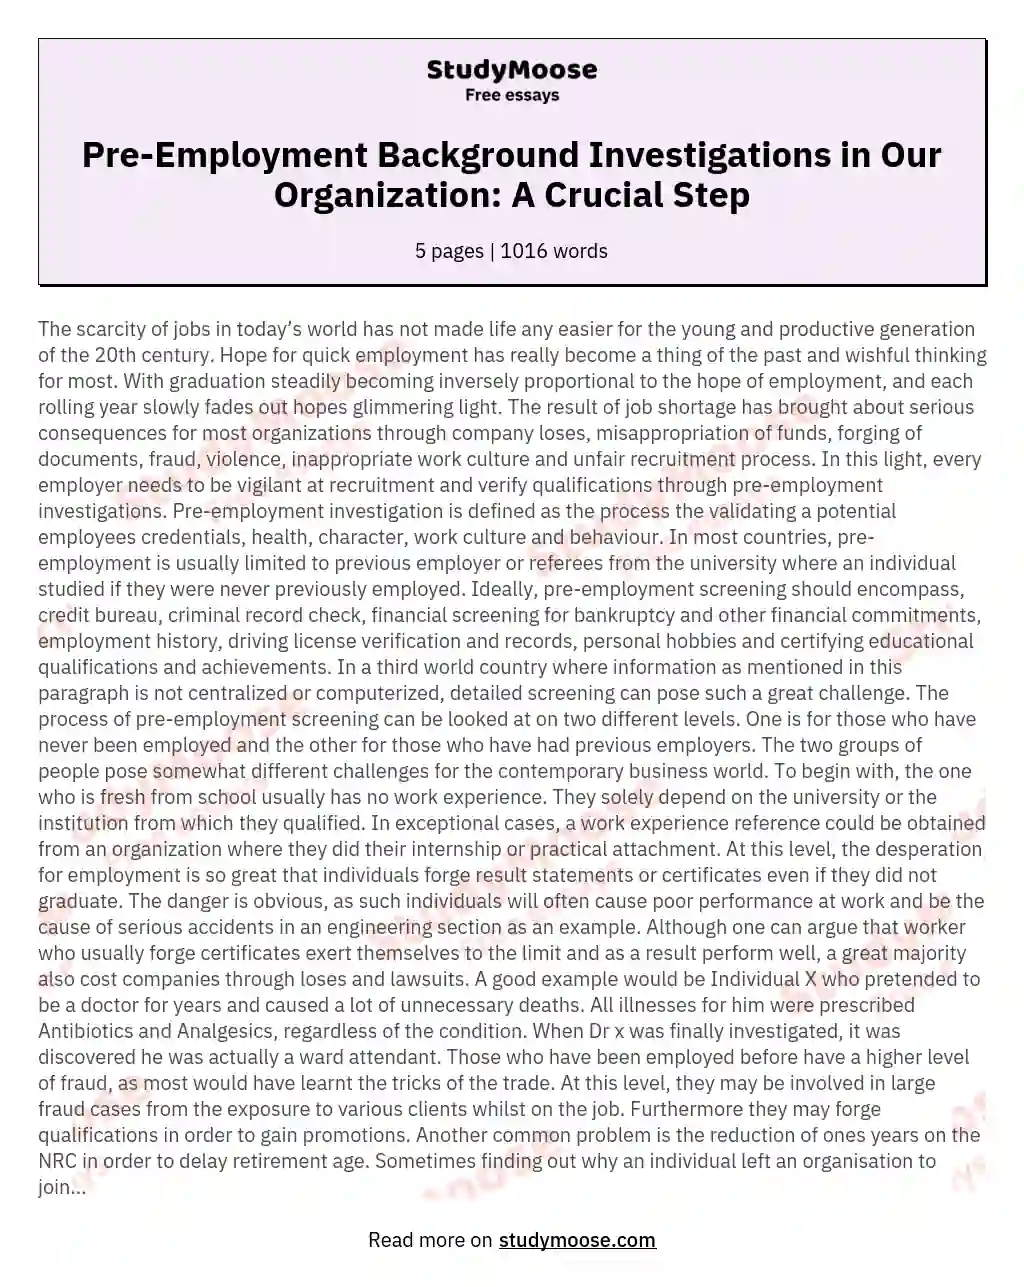 The Importance of Pre-Employment Background Investigation and How It Applies to My Organisation